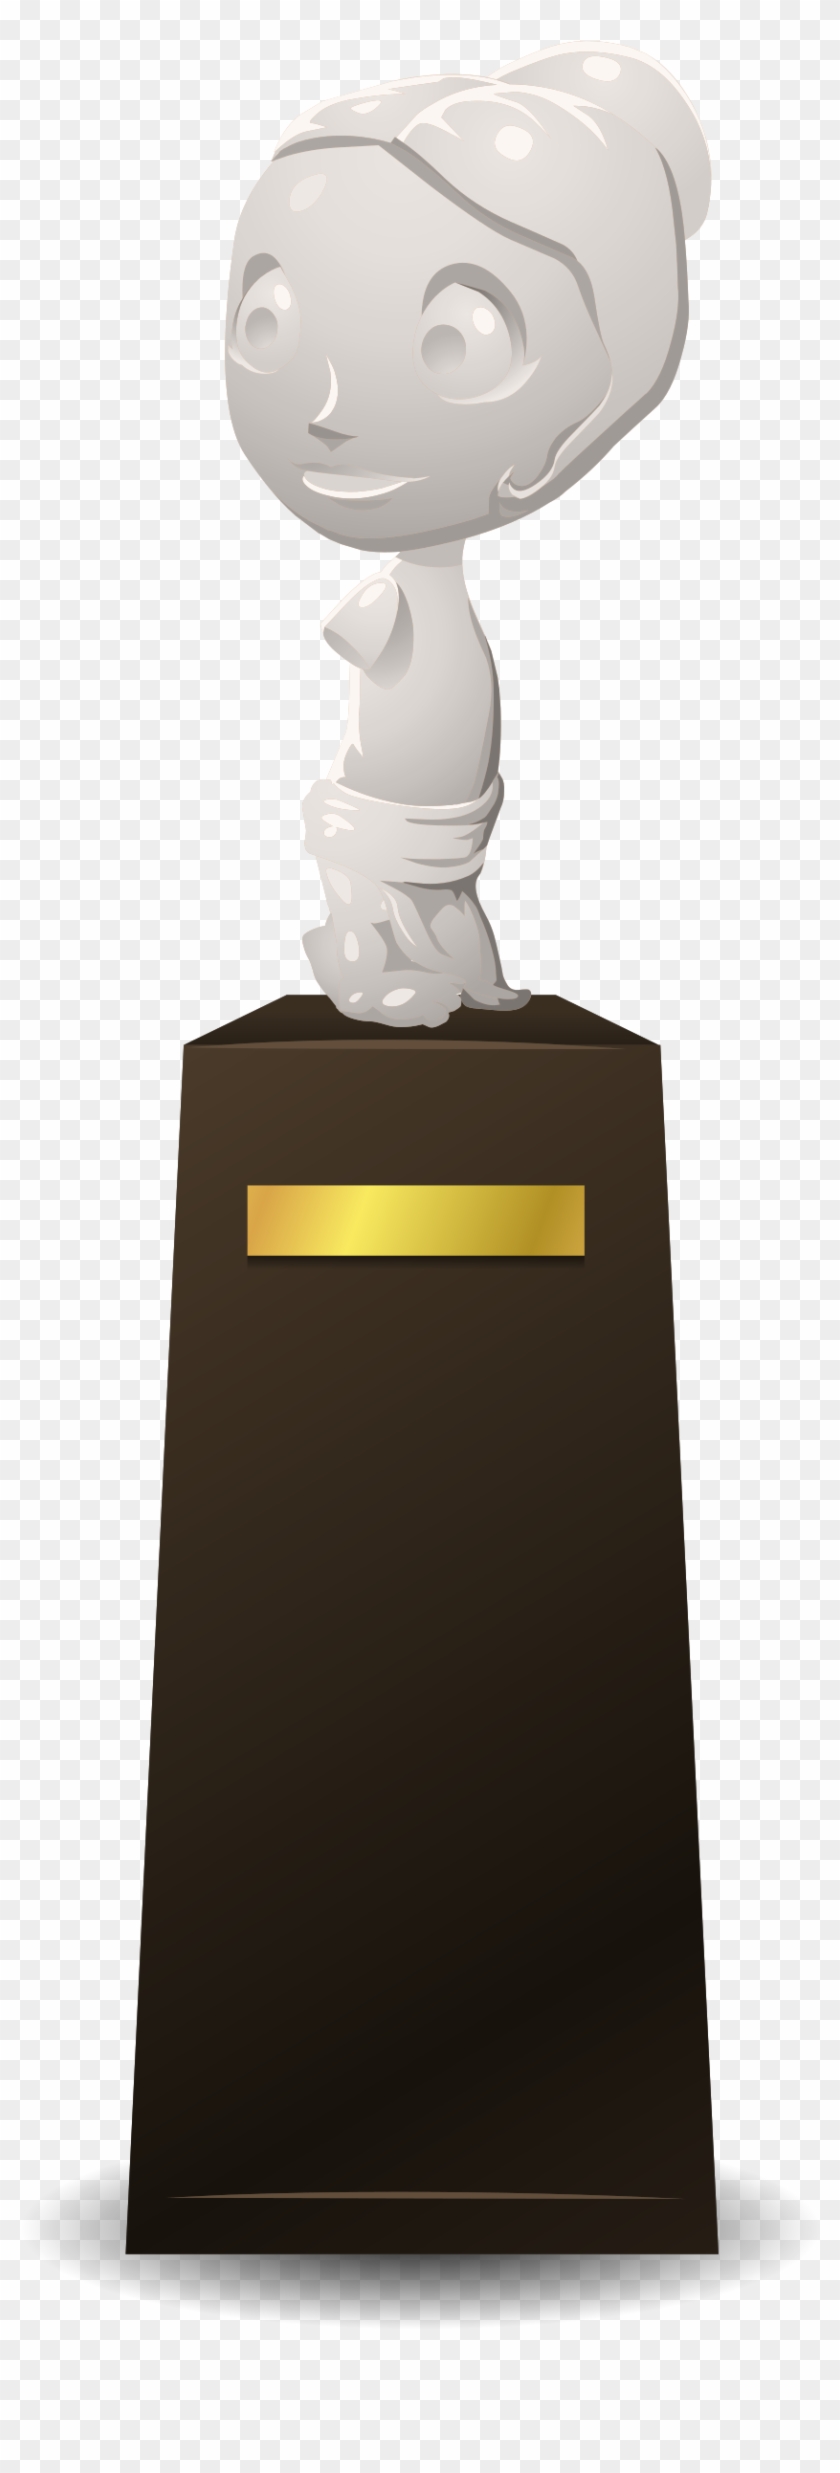 This Free Icons Png Design Of Statue On A Pedestal Clipart #1843107